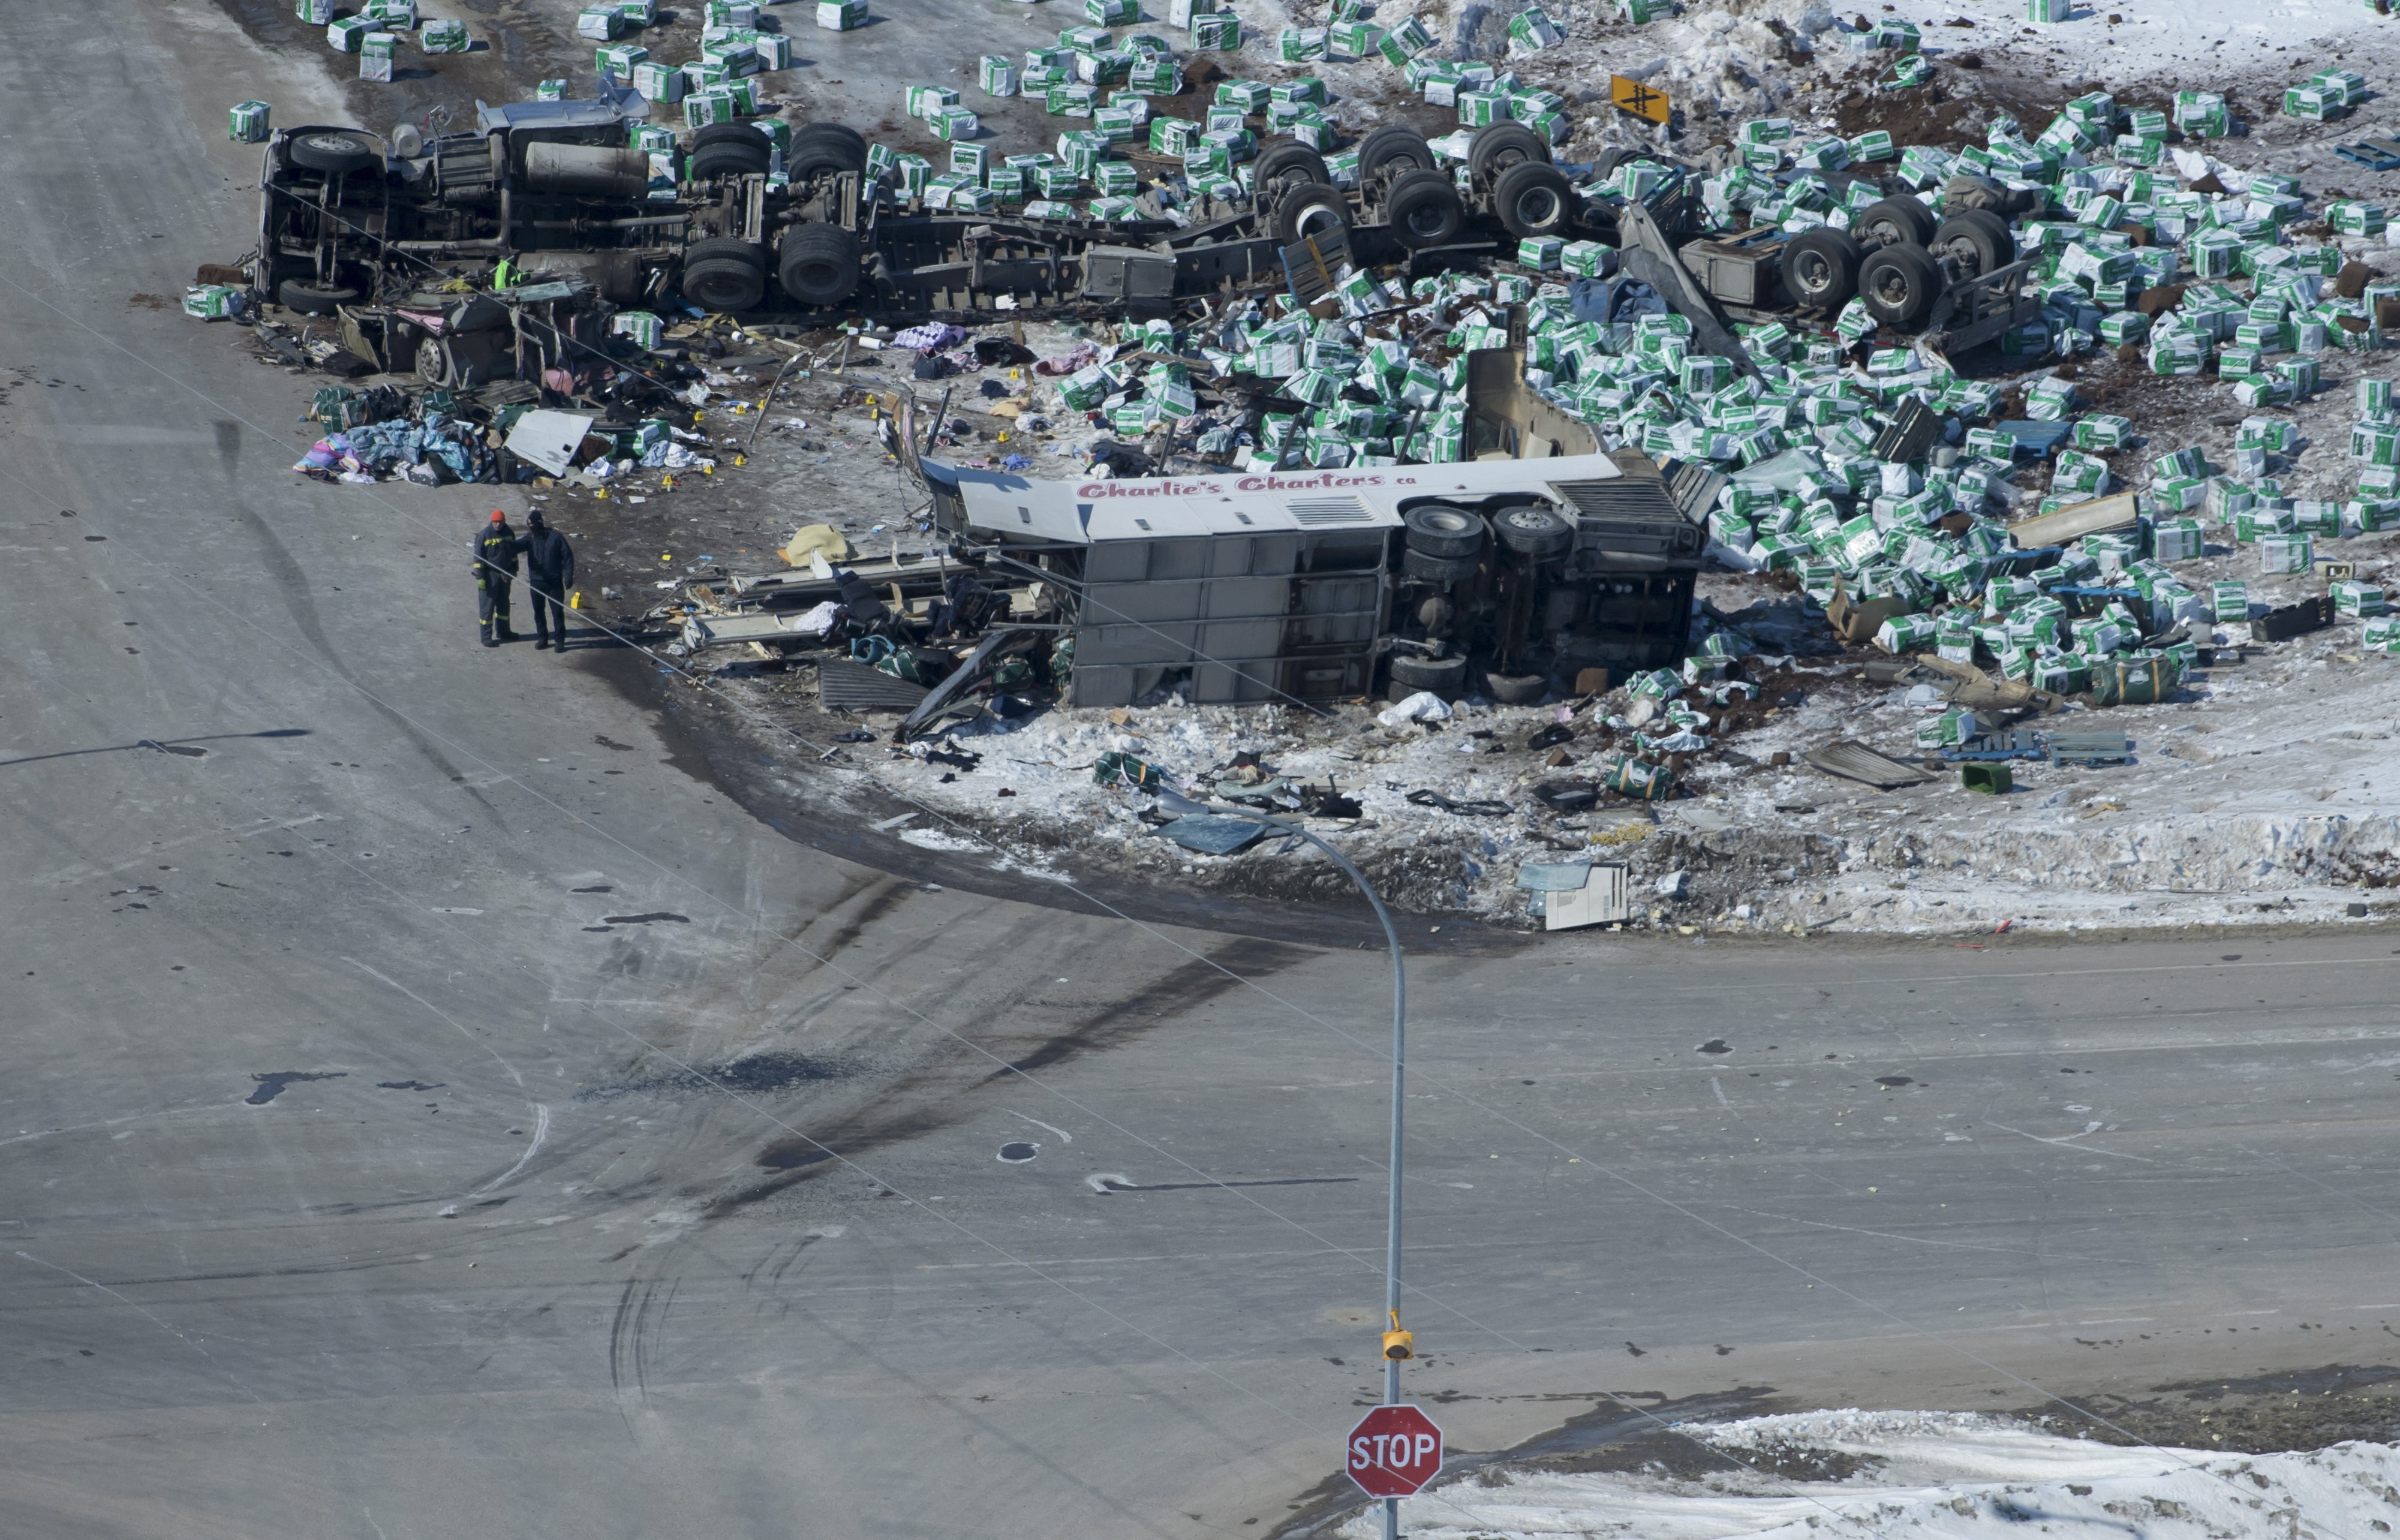 Timeline: A look at the events following the Humboldt Broncos bus